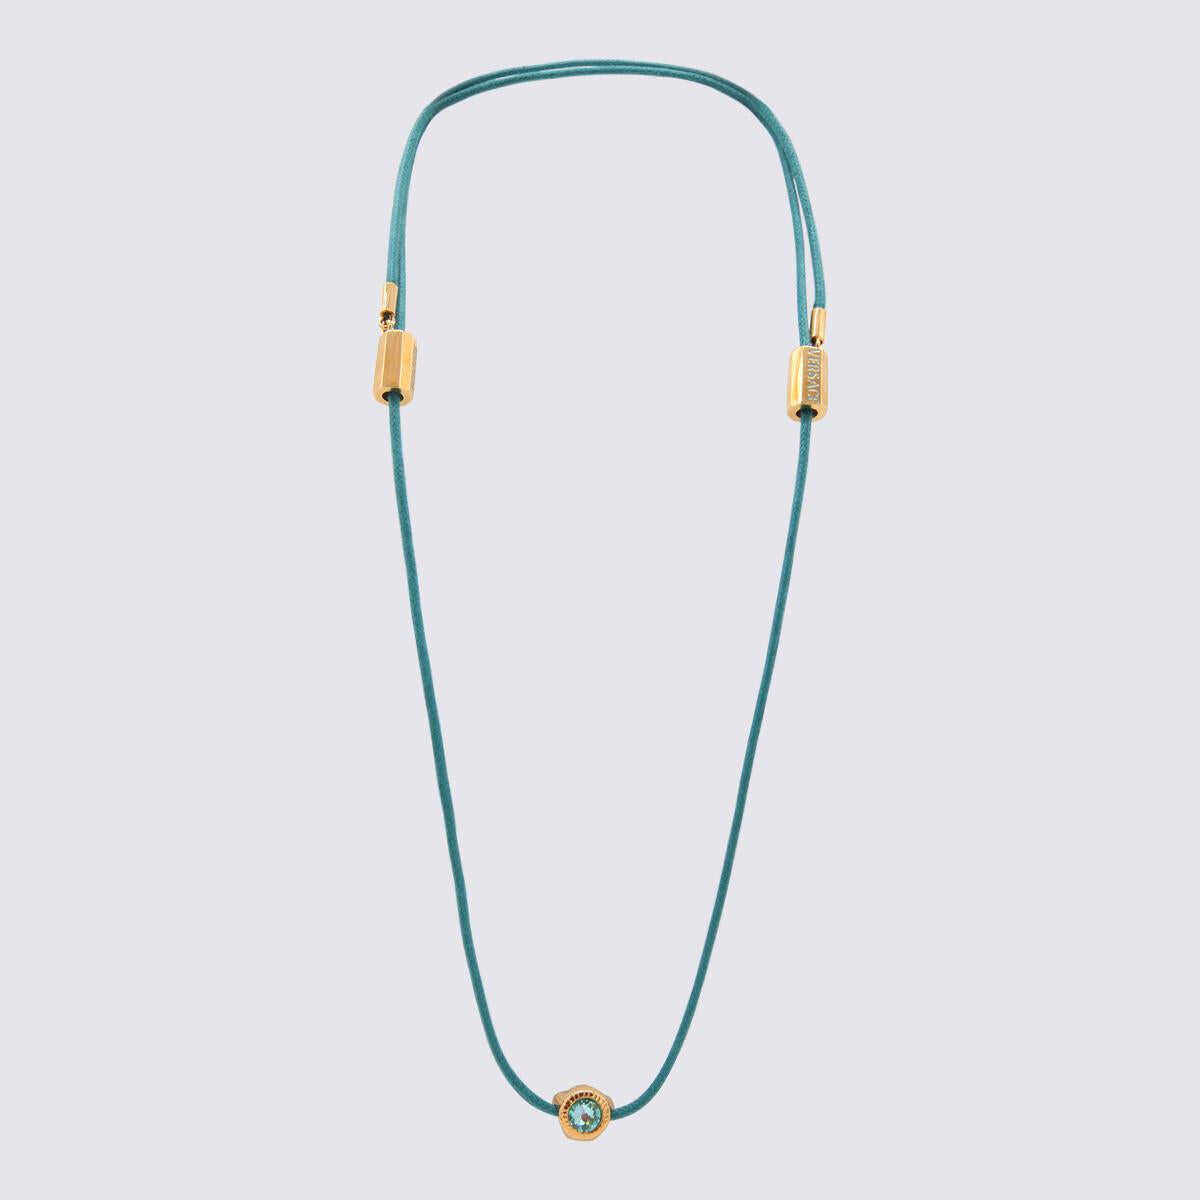 Versace VERSACE TURQUOISE AND GOLD METAL MEDUSA CRYSTALS NECKLACE ORO VERSACE-TEAL